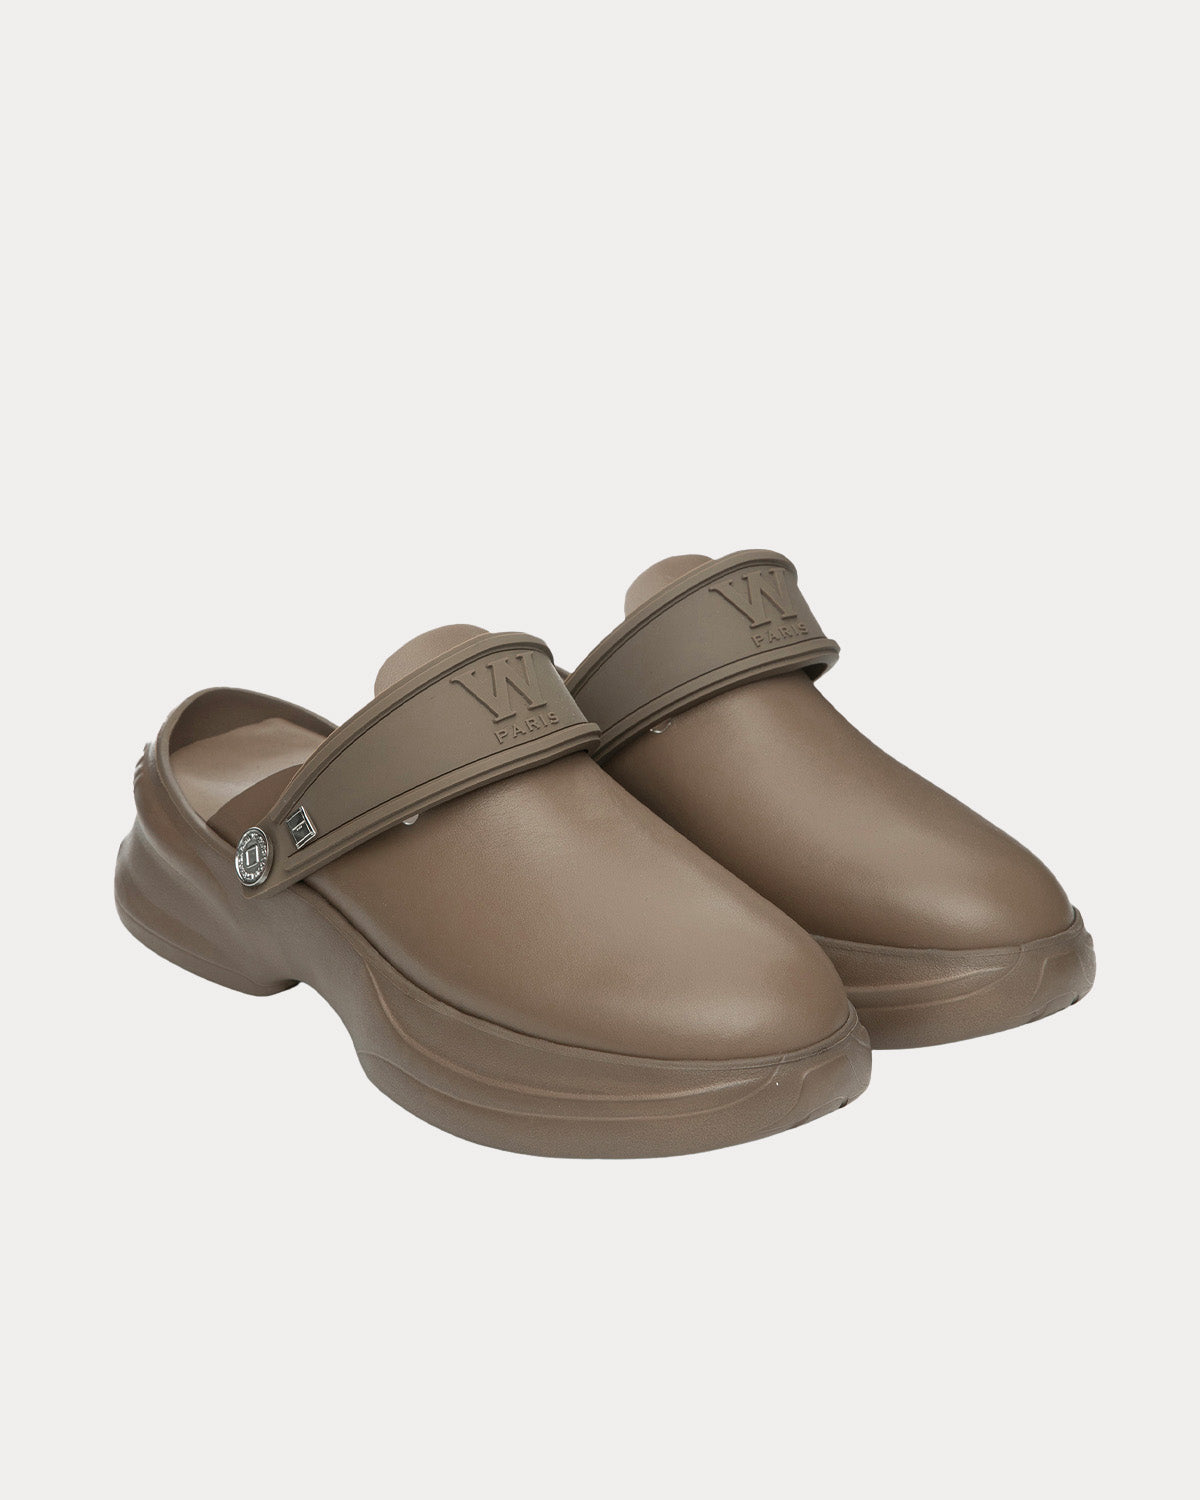 Wooyoungmi - Slingback Leather Beige Clogs